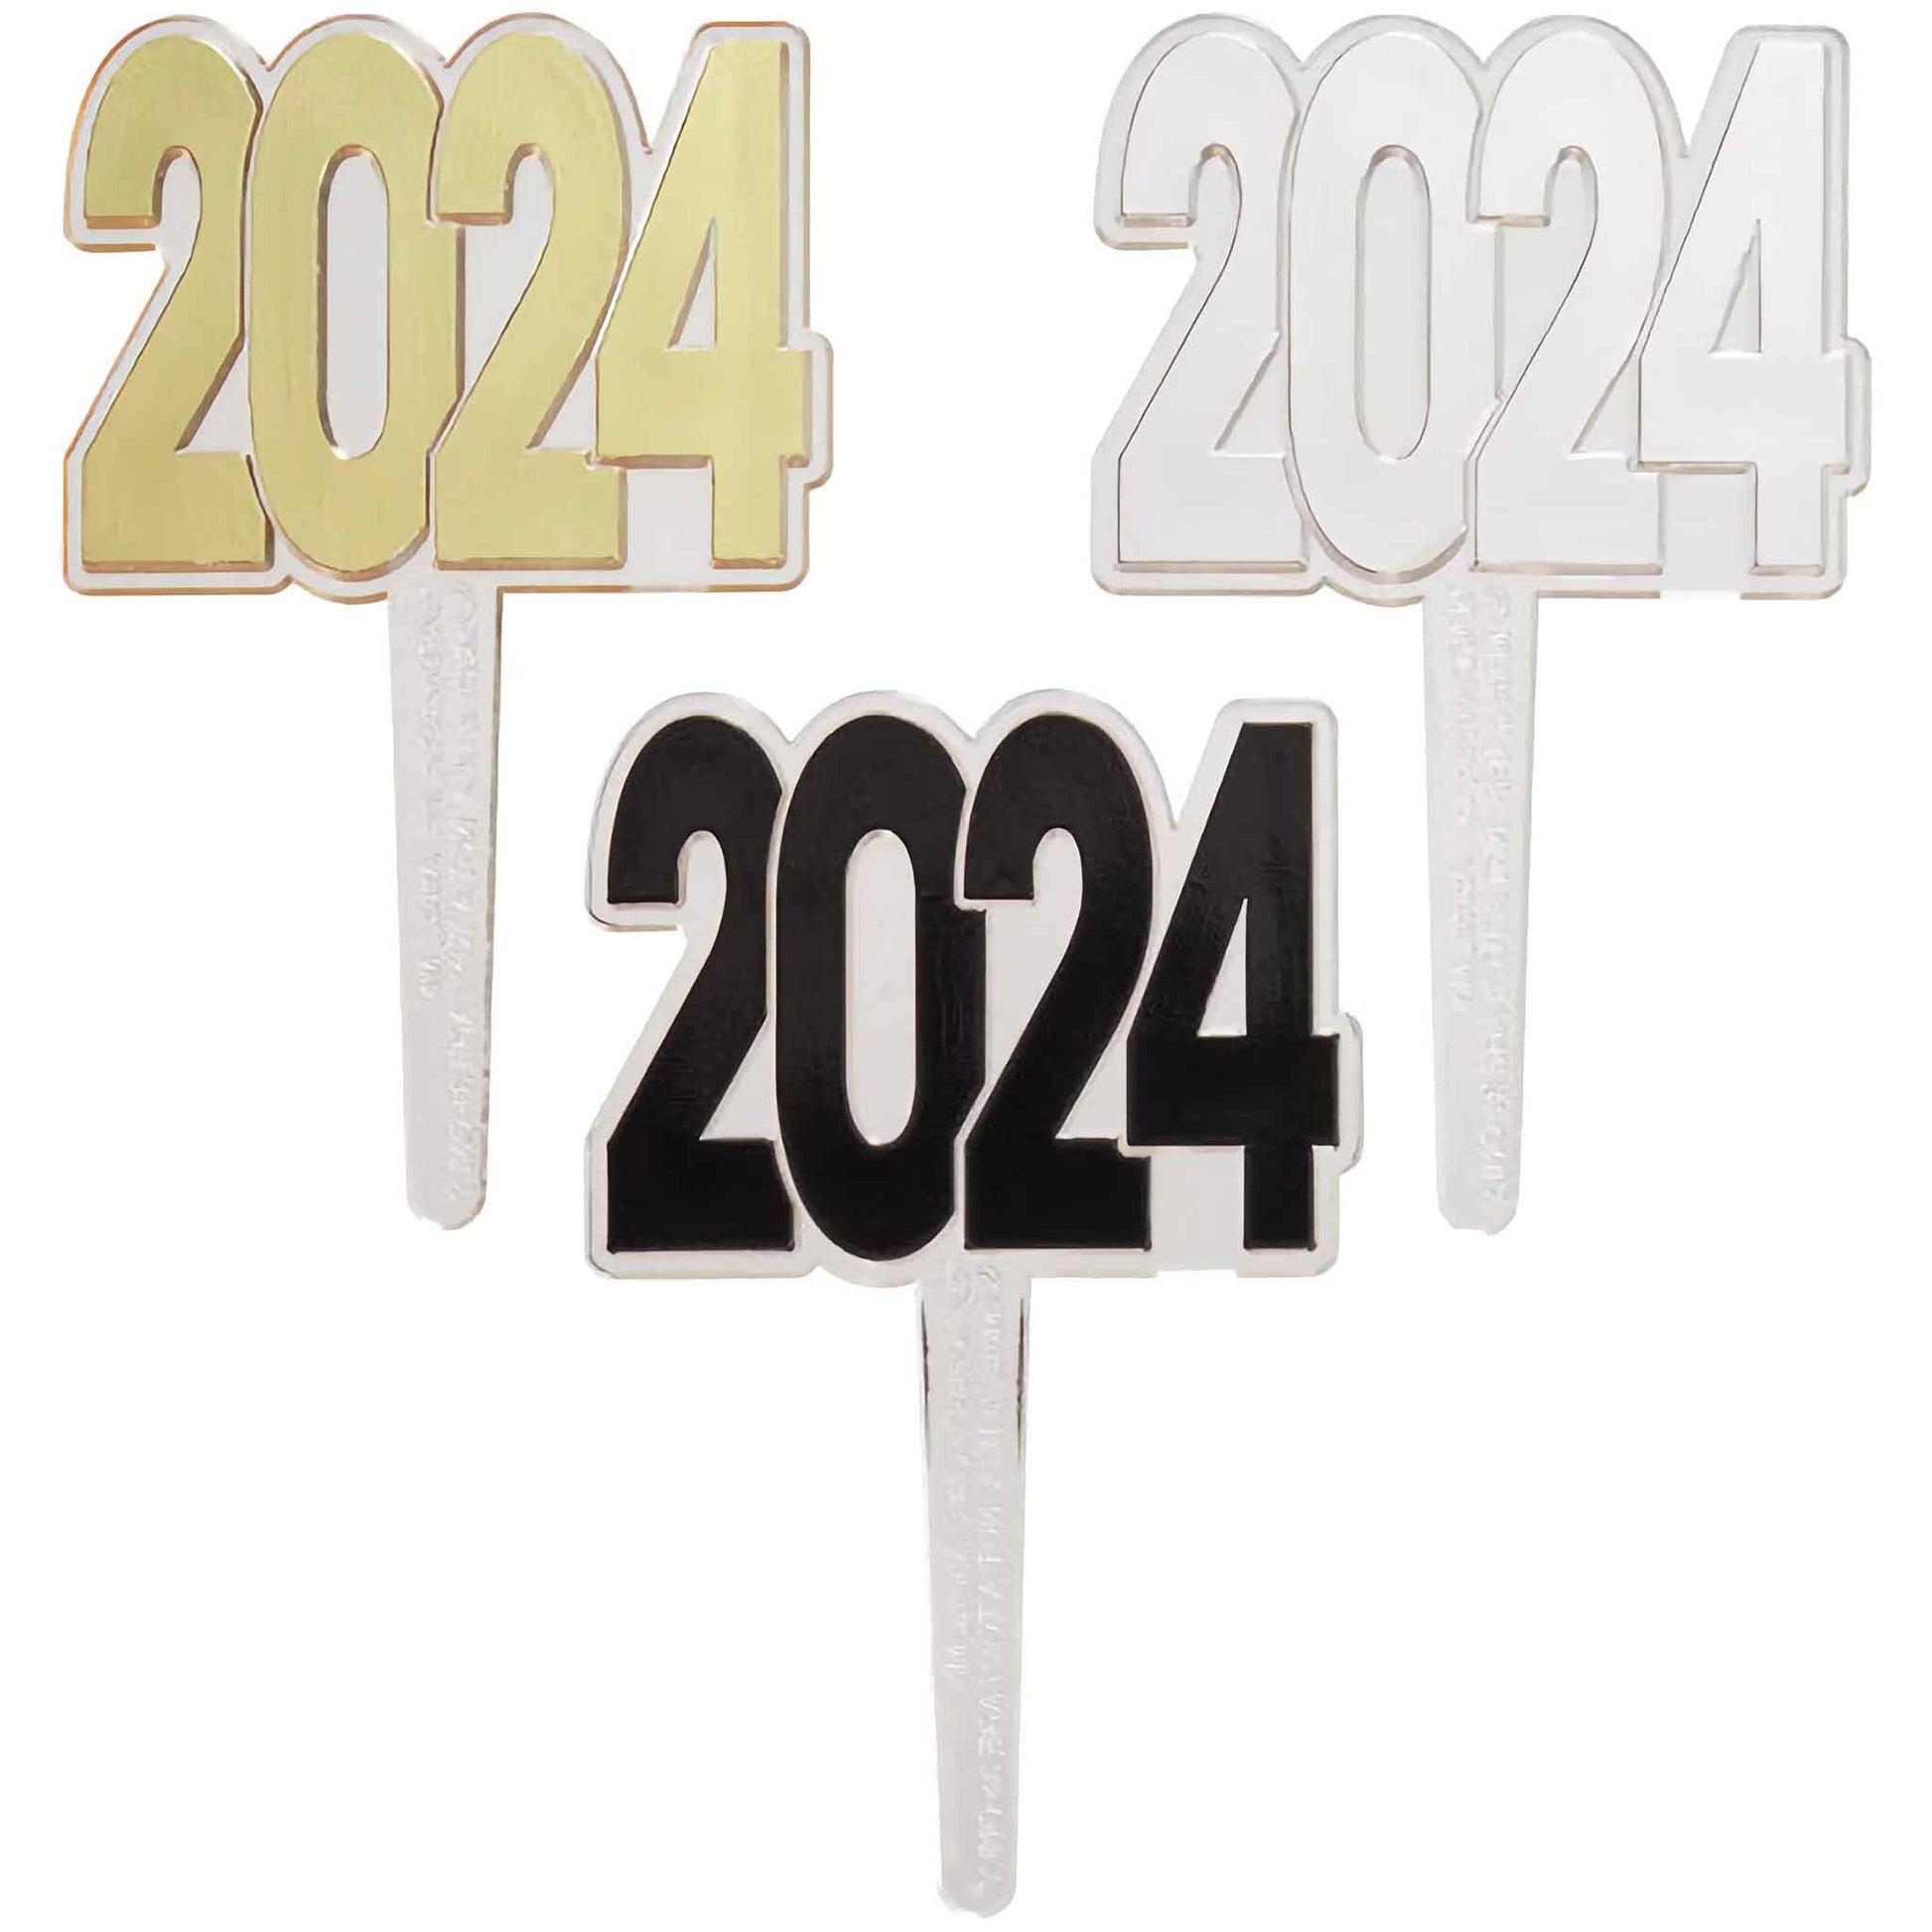 Elegant '2024' cupcake topper picks, available in gold, black, and silver for a classy graduation celebration. These toppers are designed to make your desserts stand out, available at Lynn's Cake, Candy, and Chocolate Supplies.